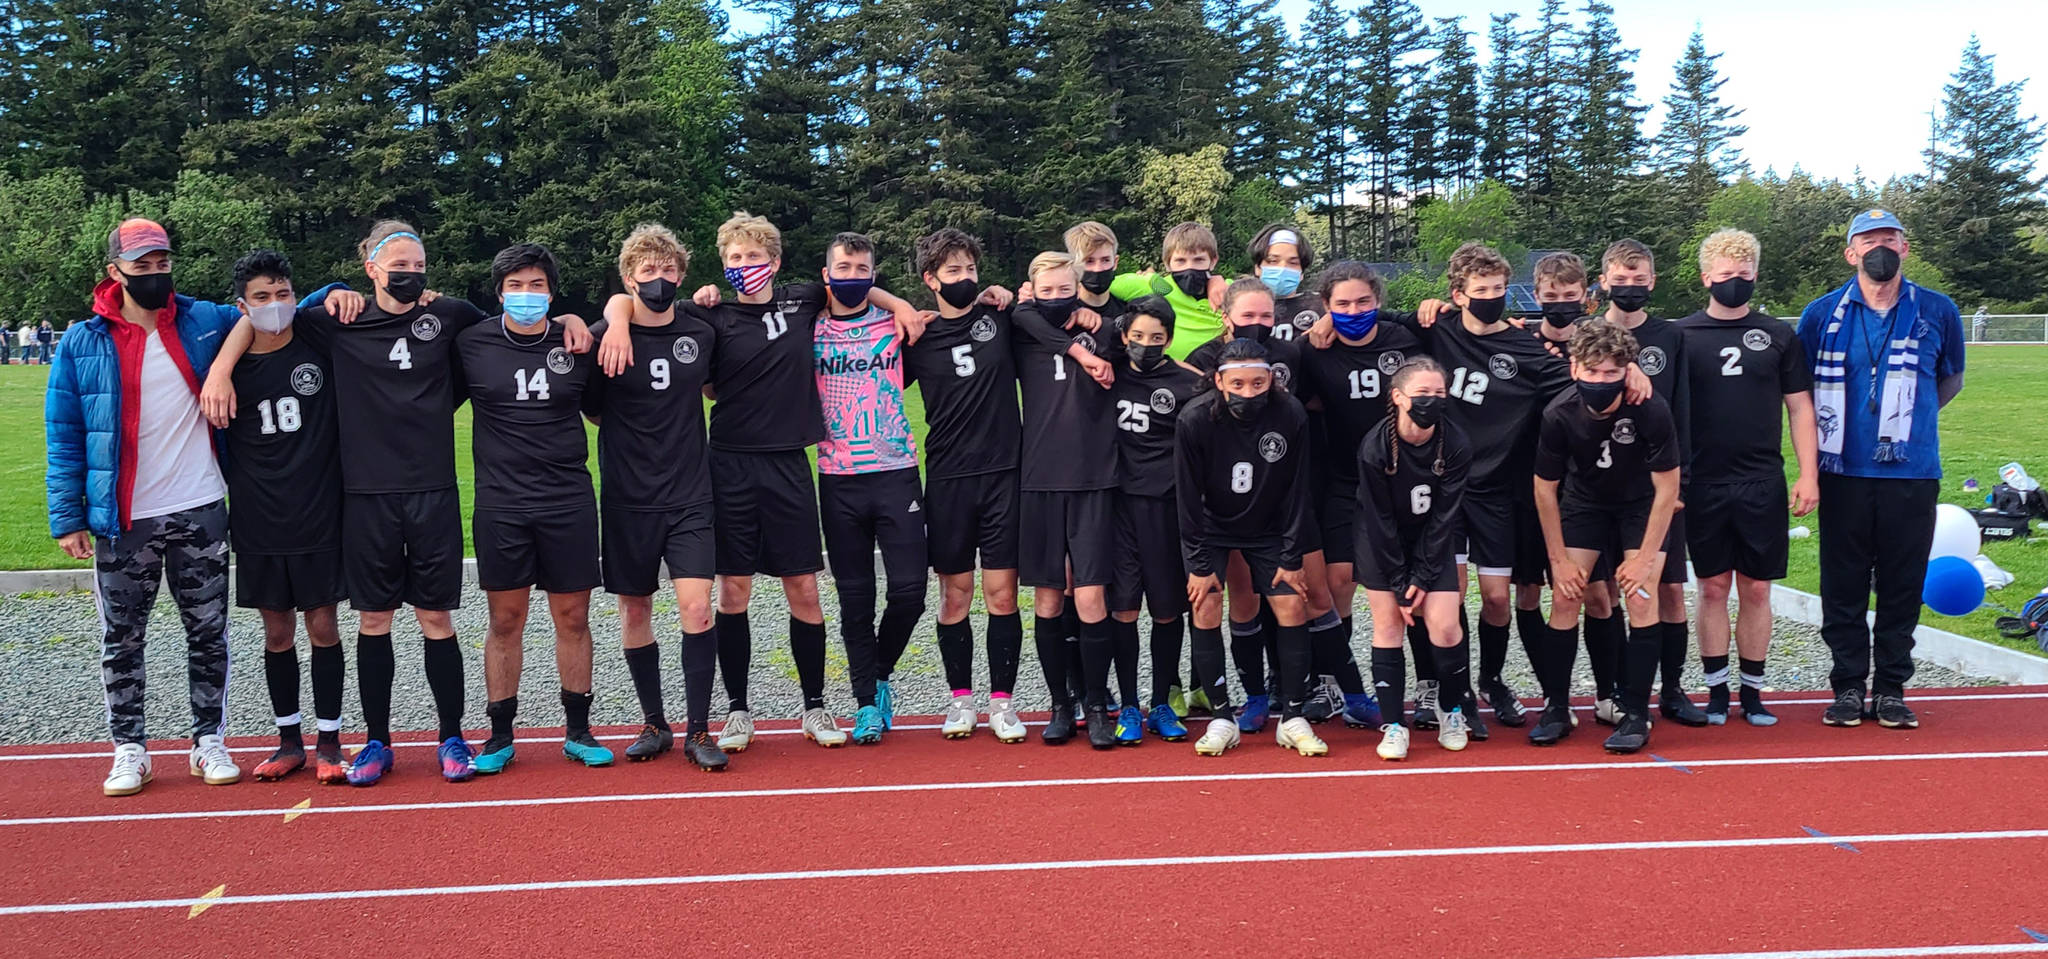 Portia White photo
The Vikings’ soccer team was crowned league champion on May 7.